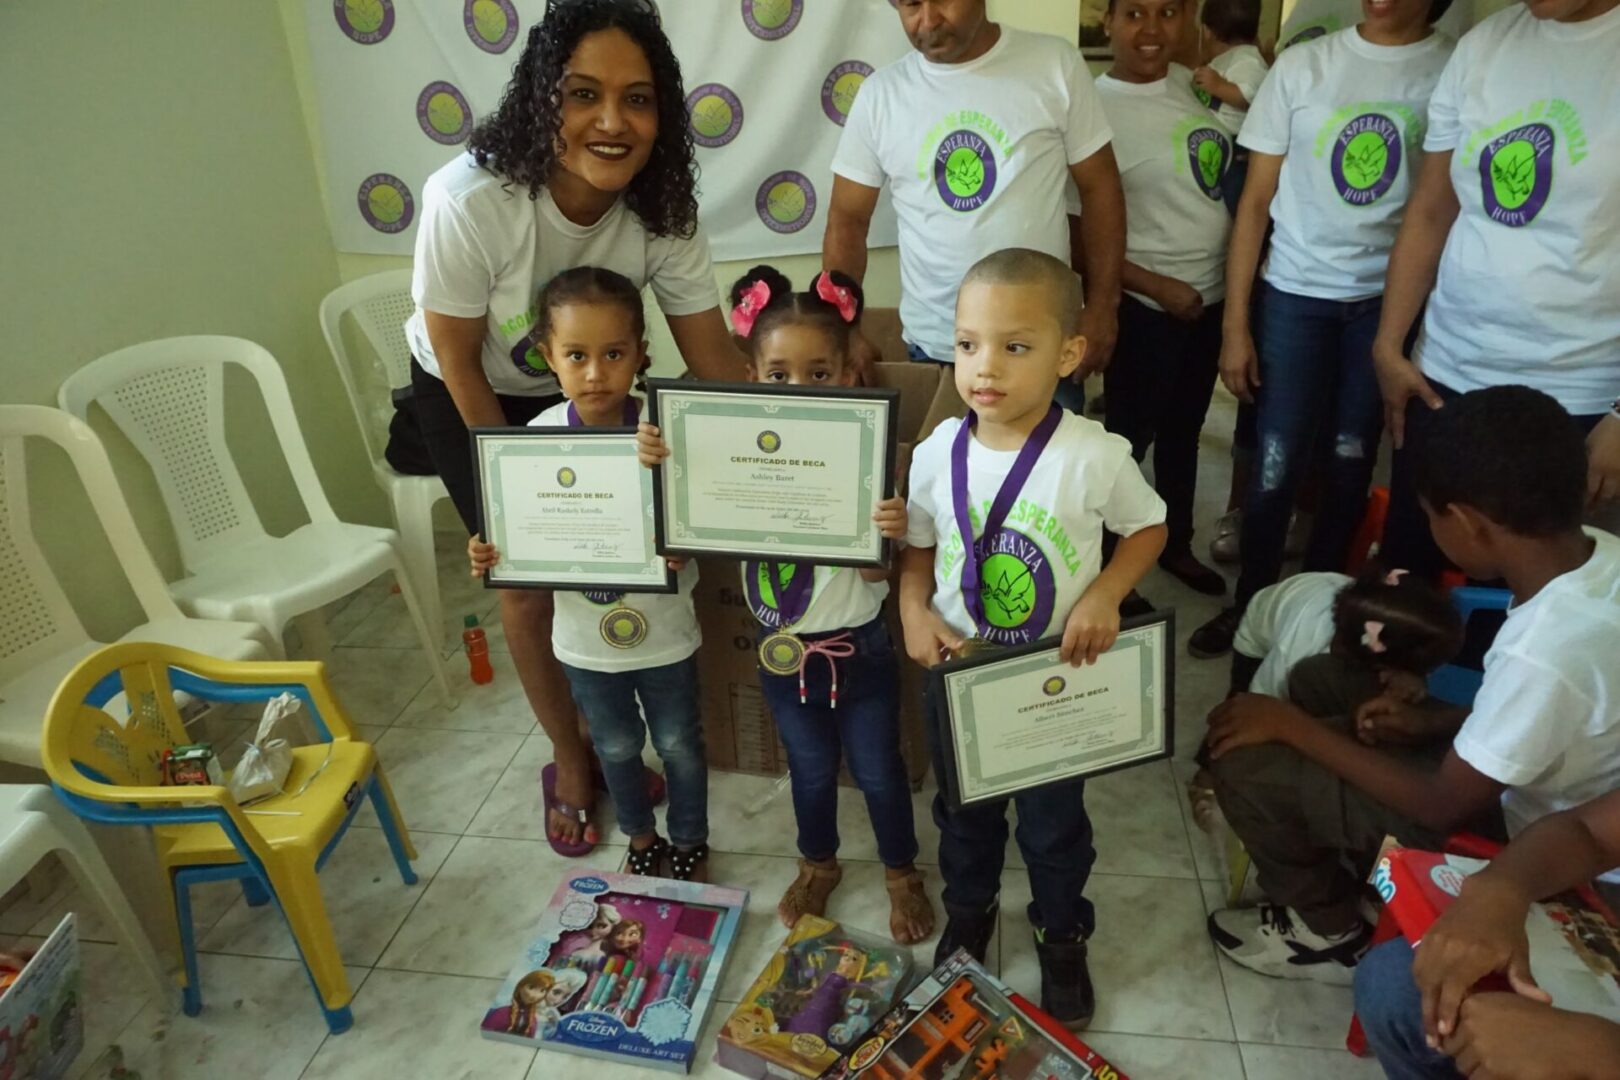 Two little girls and a little boy wearing their medals and showing their certificates